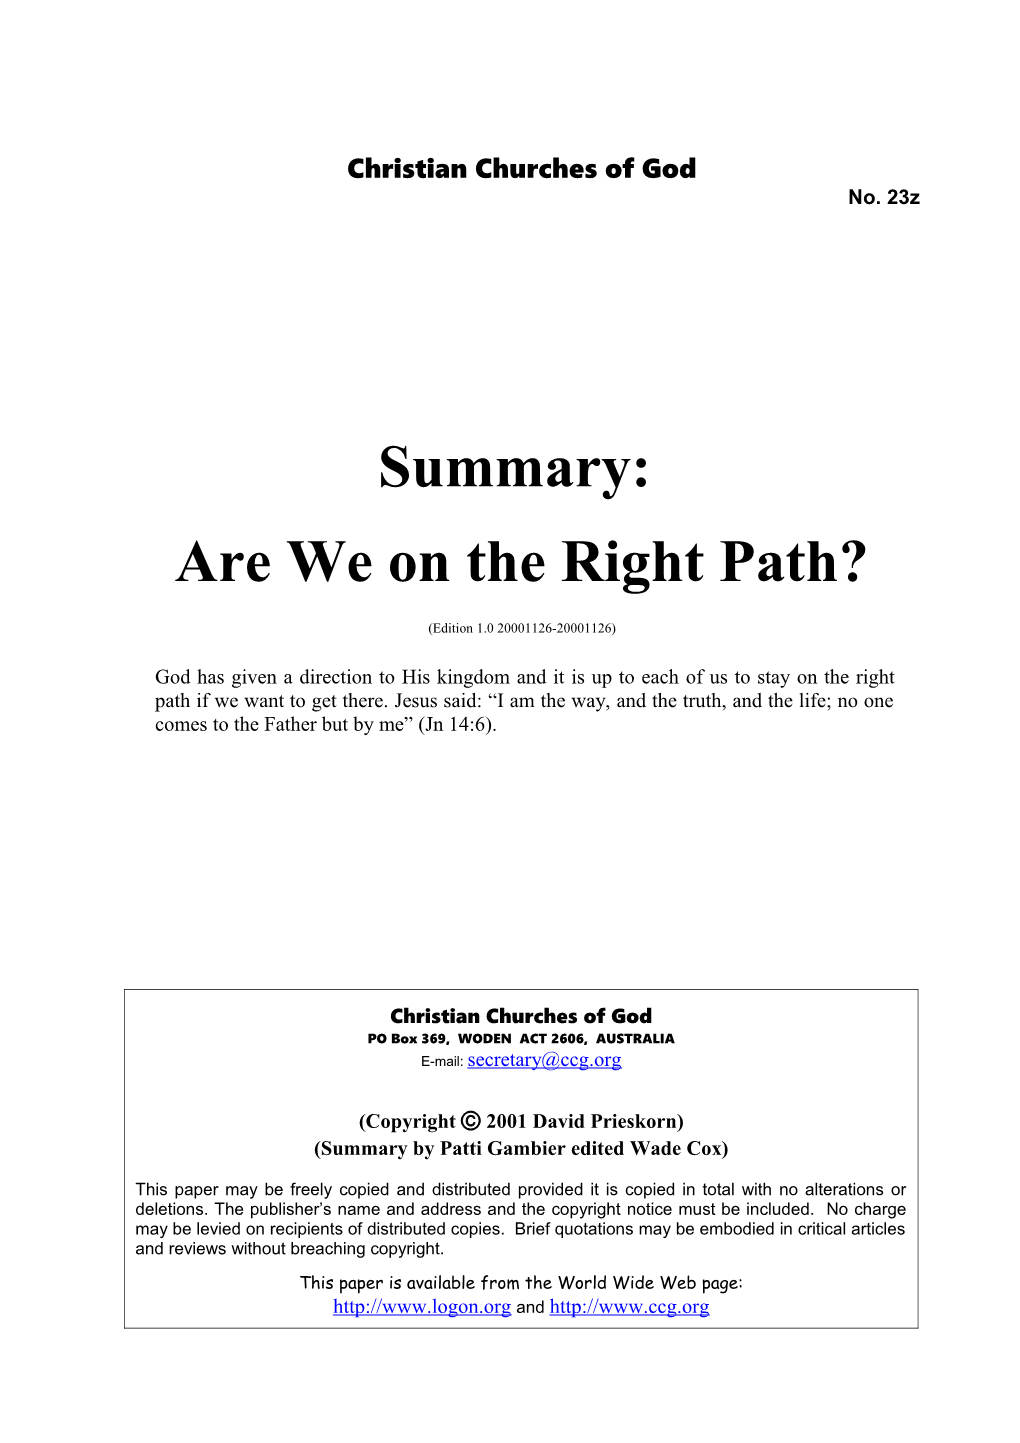 Summary: Are We on the Right Path? (No. 23Z)